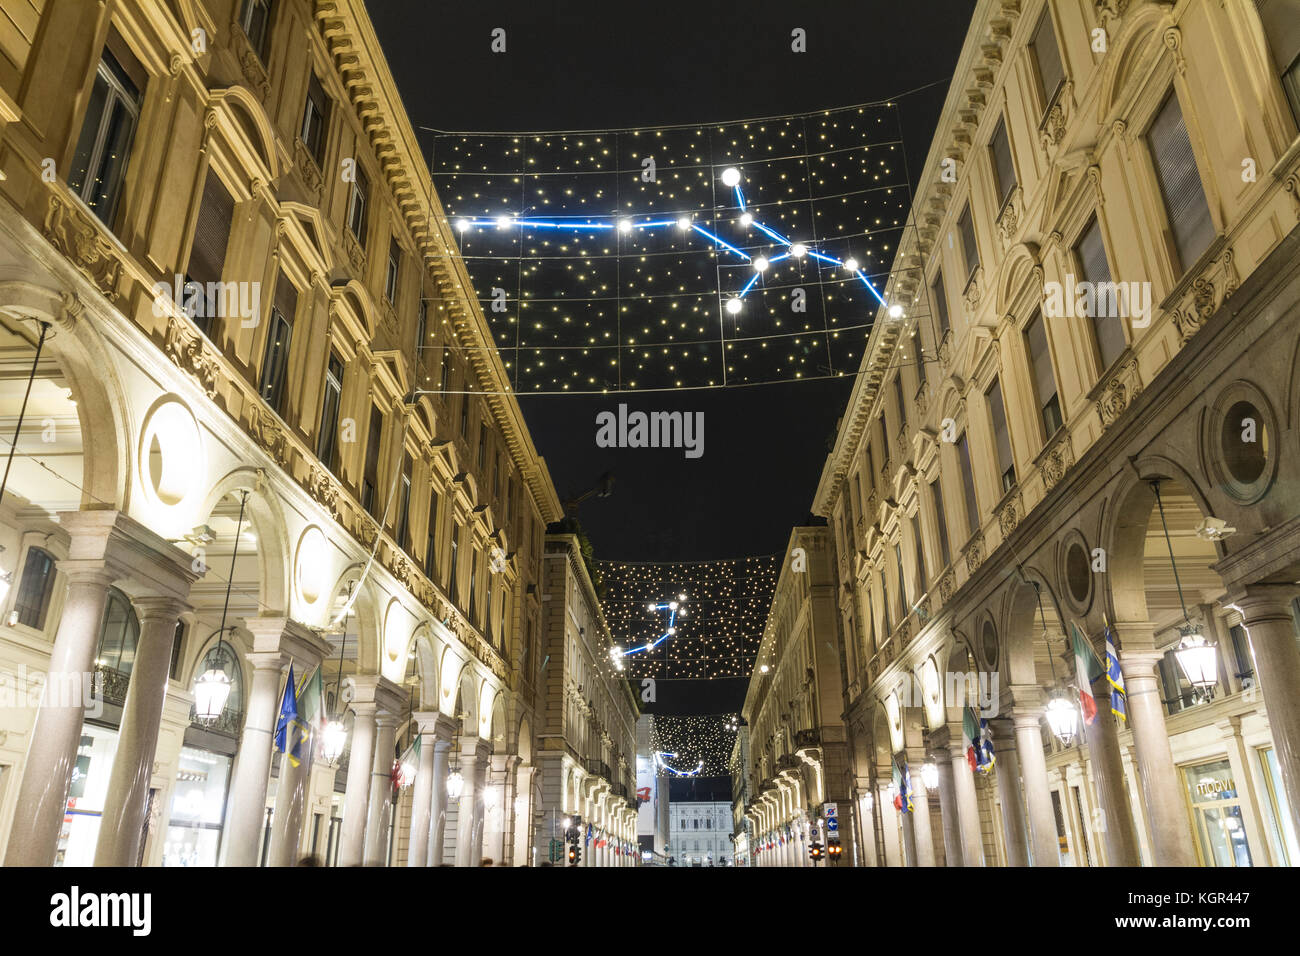 Turin dowtown with the Luci d'Artista in via Roma. Stock Photo